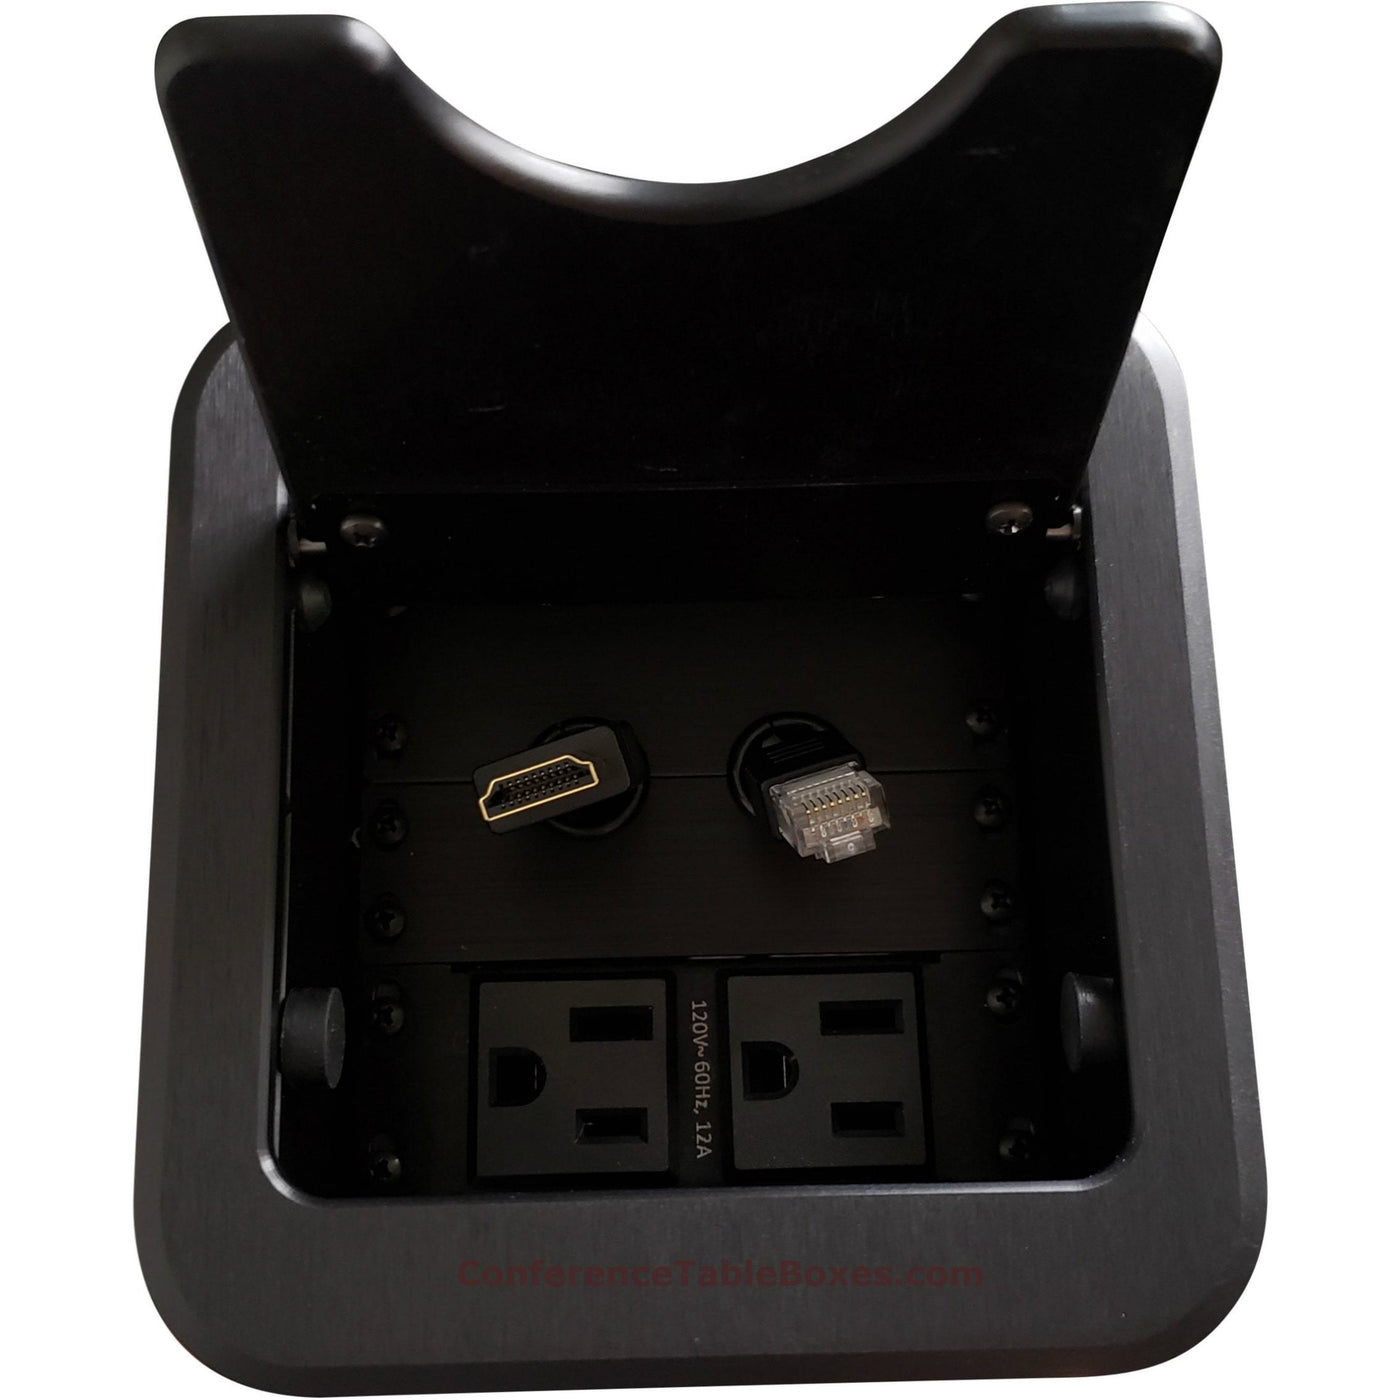 Cable Well Box with HDMI & Cat6 Retractable Cables, 2 Power